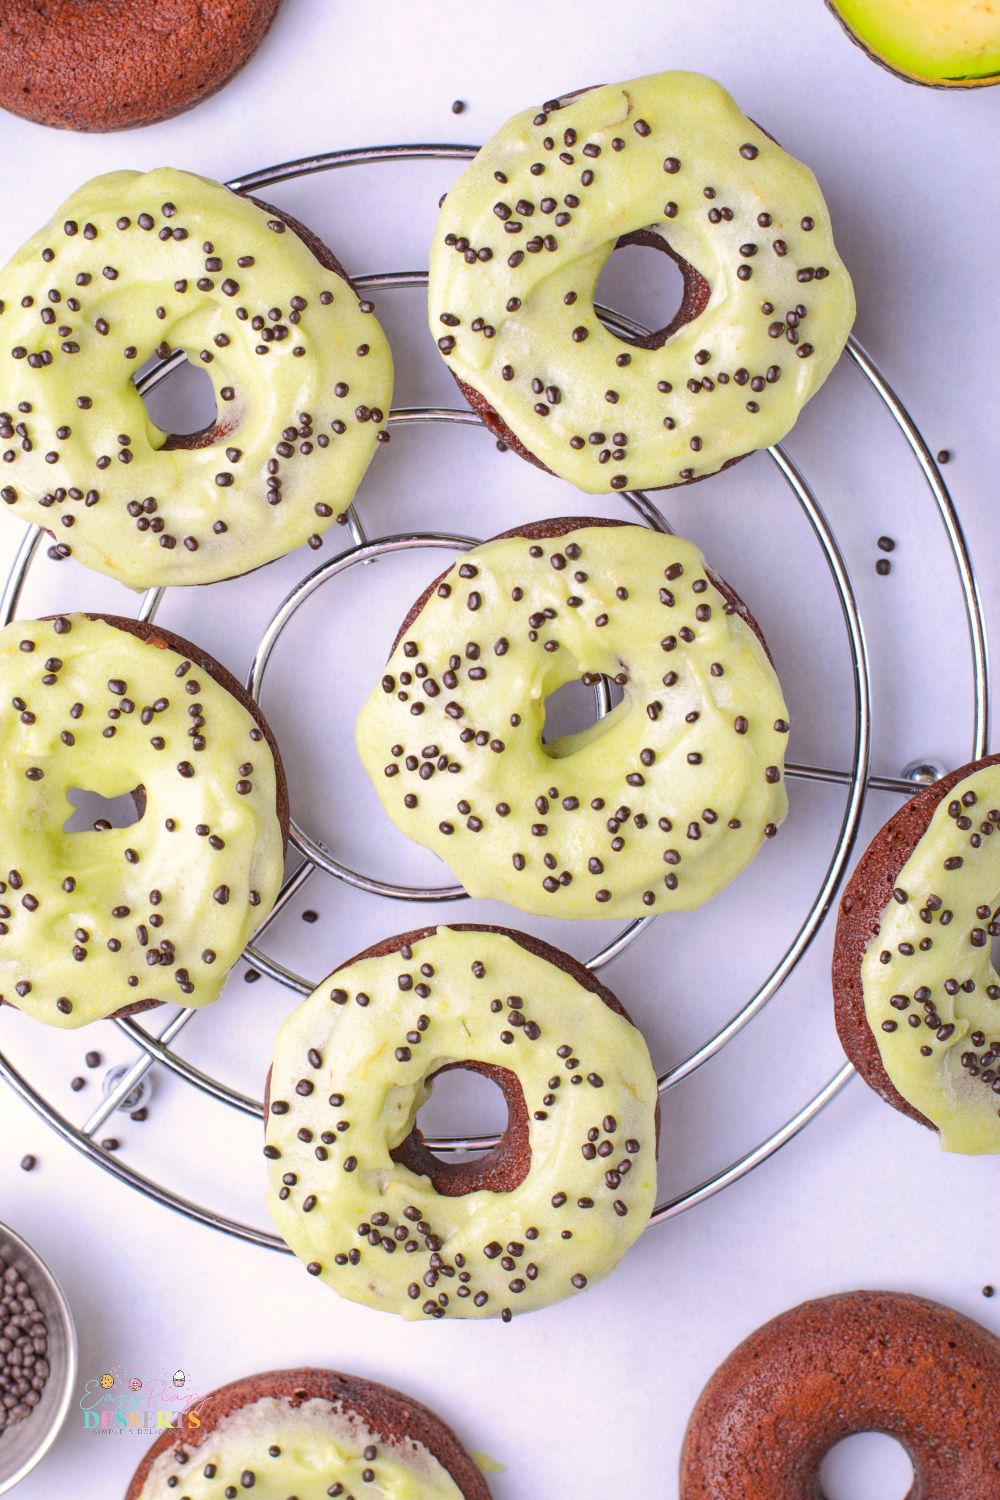 Over head image of oven donuts with avocado